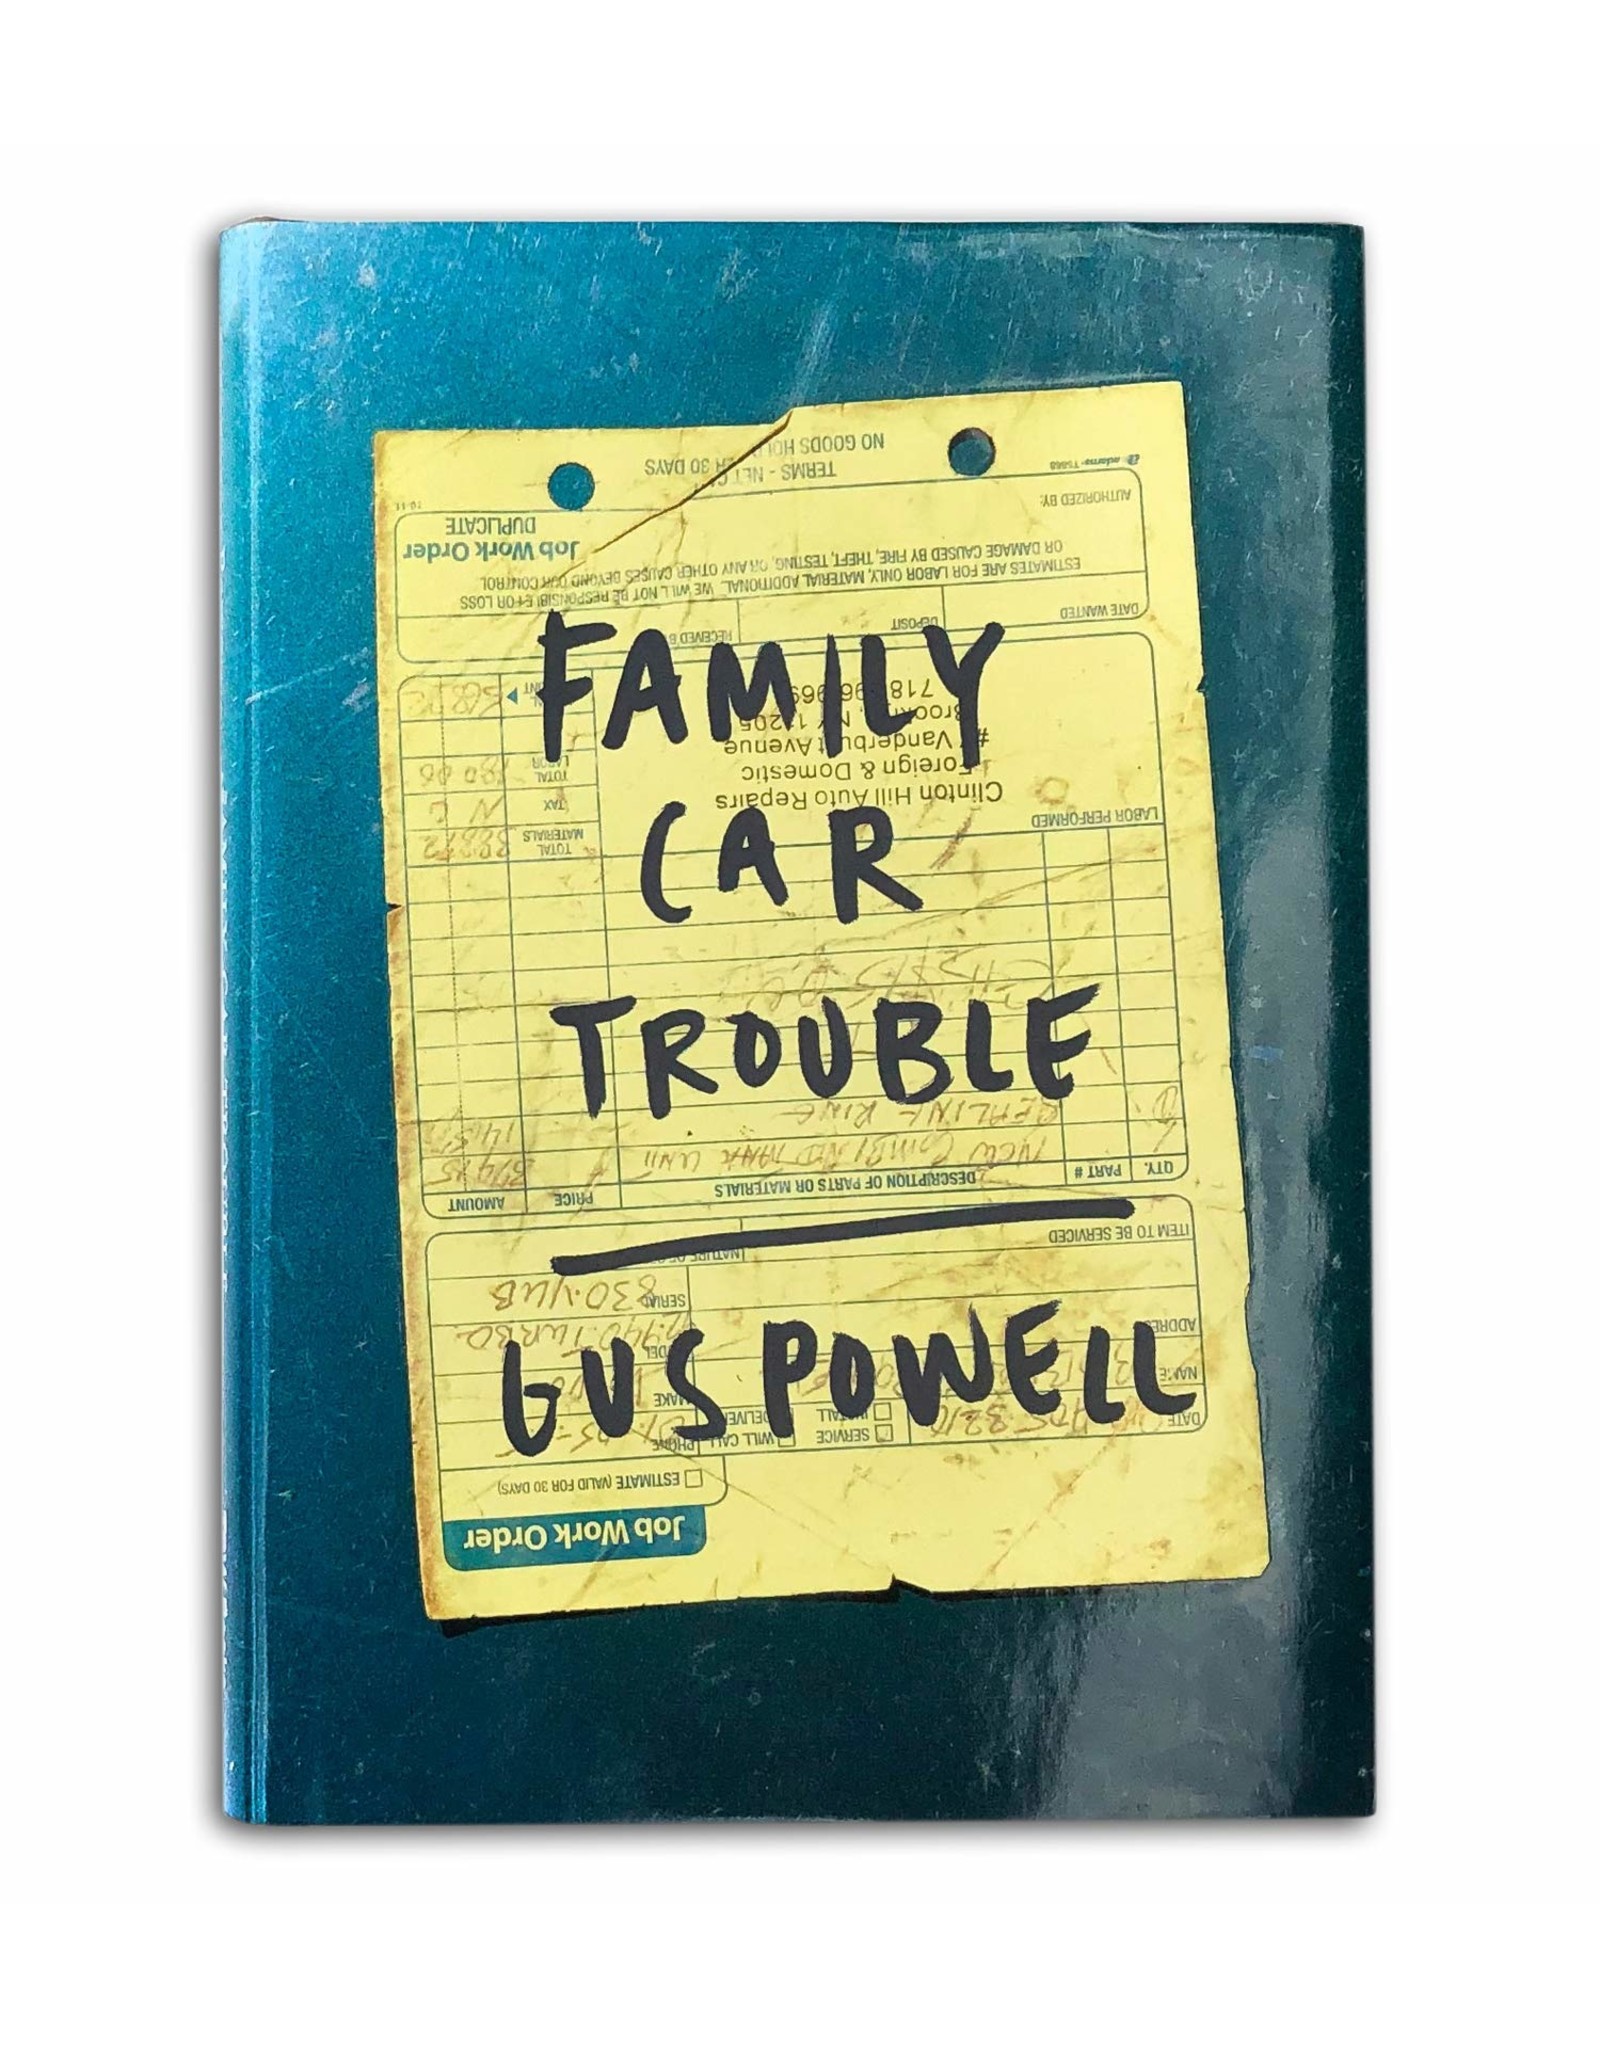 Gus Powell: Family Car Trouble